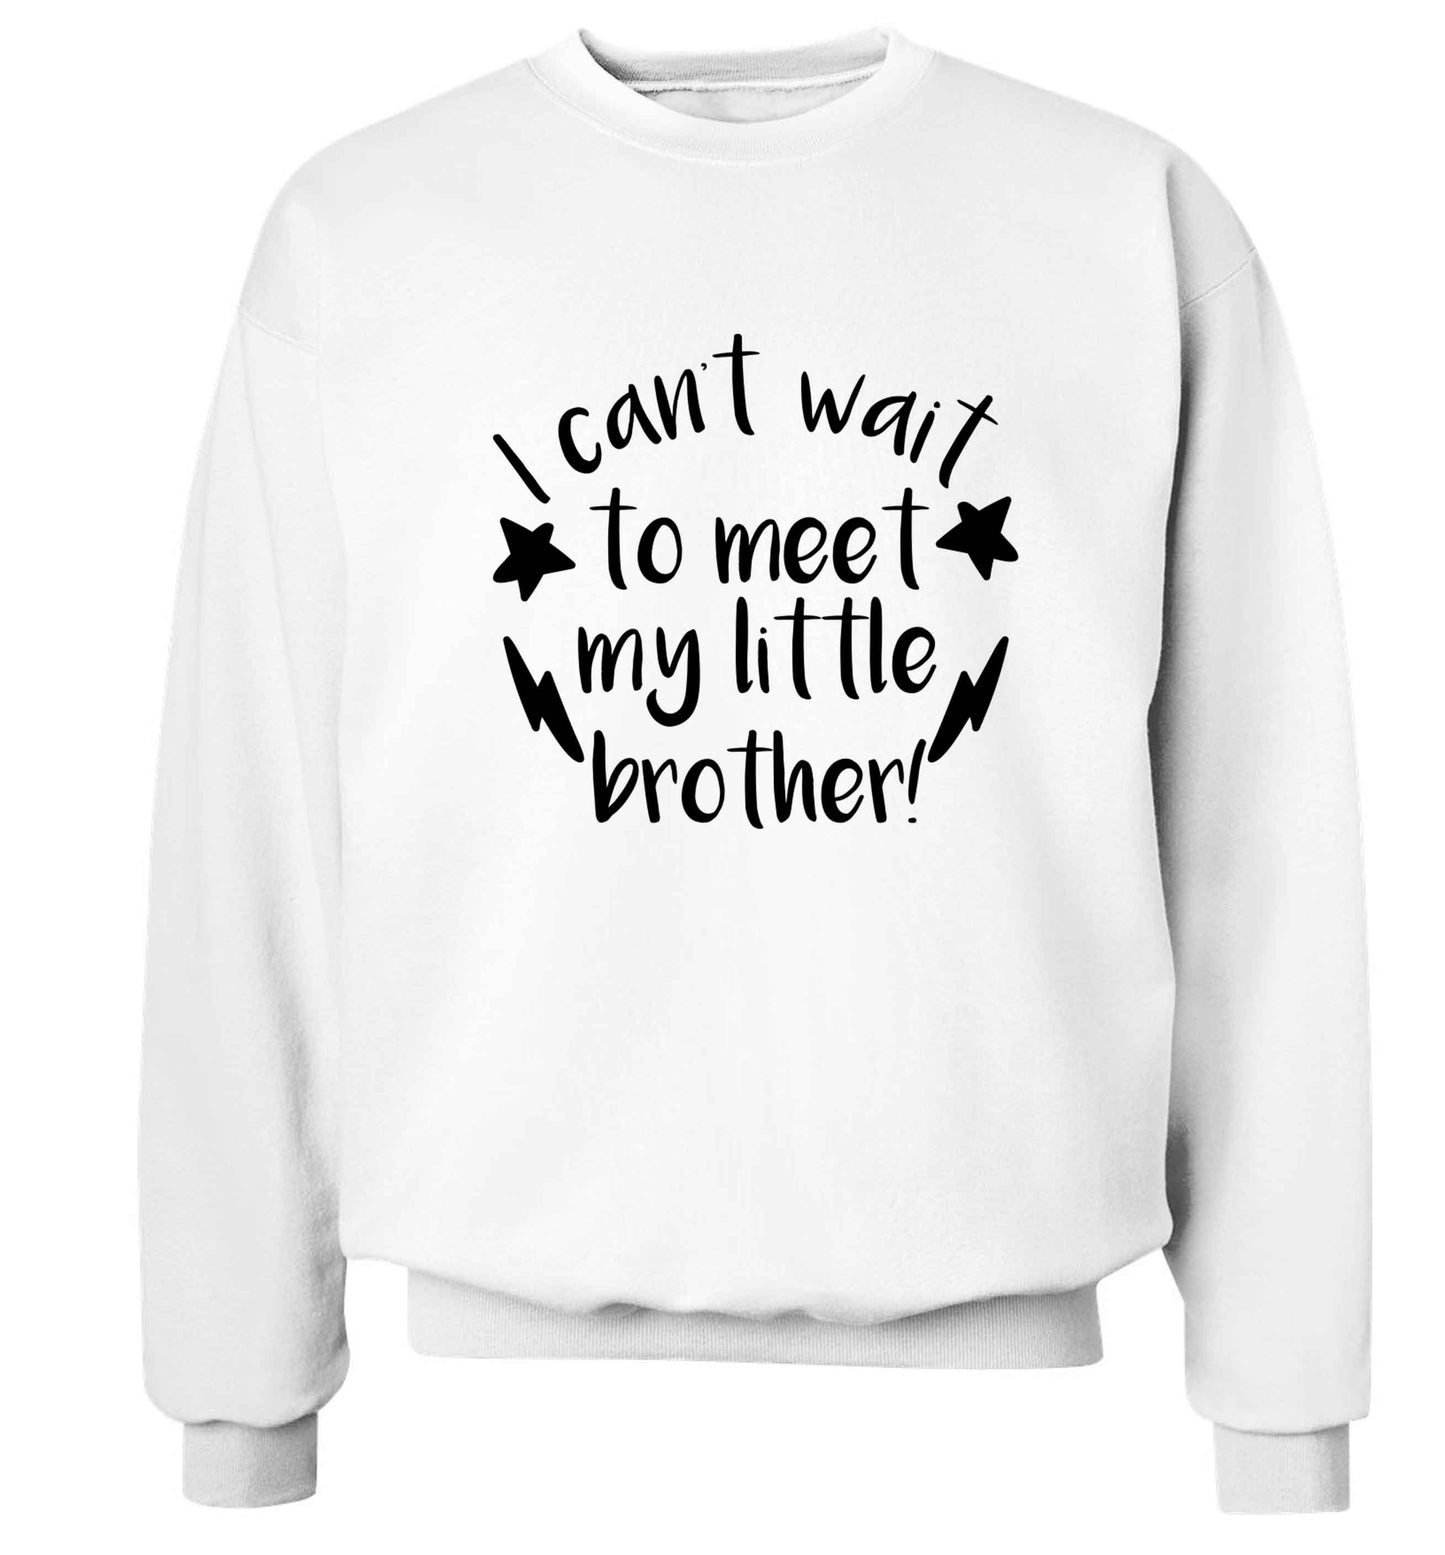 I can't wait to meet my sister! Adult's unisex white Sweater 2XL